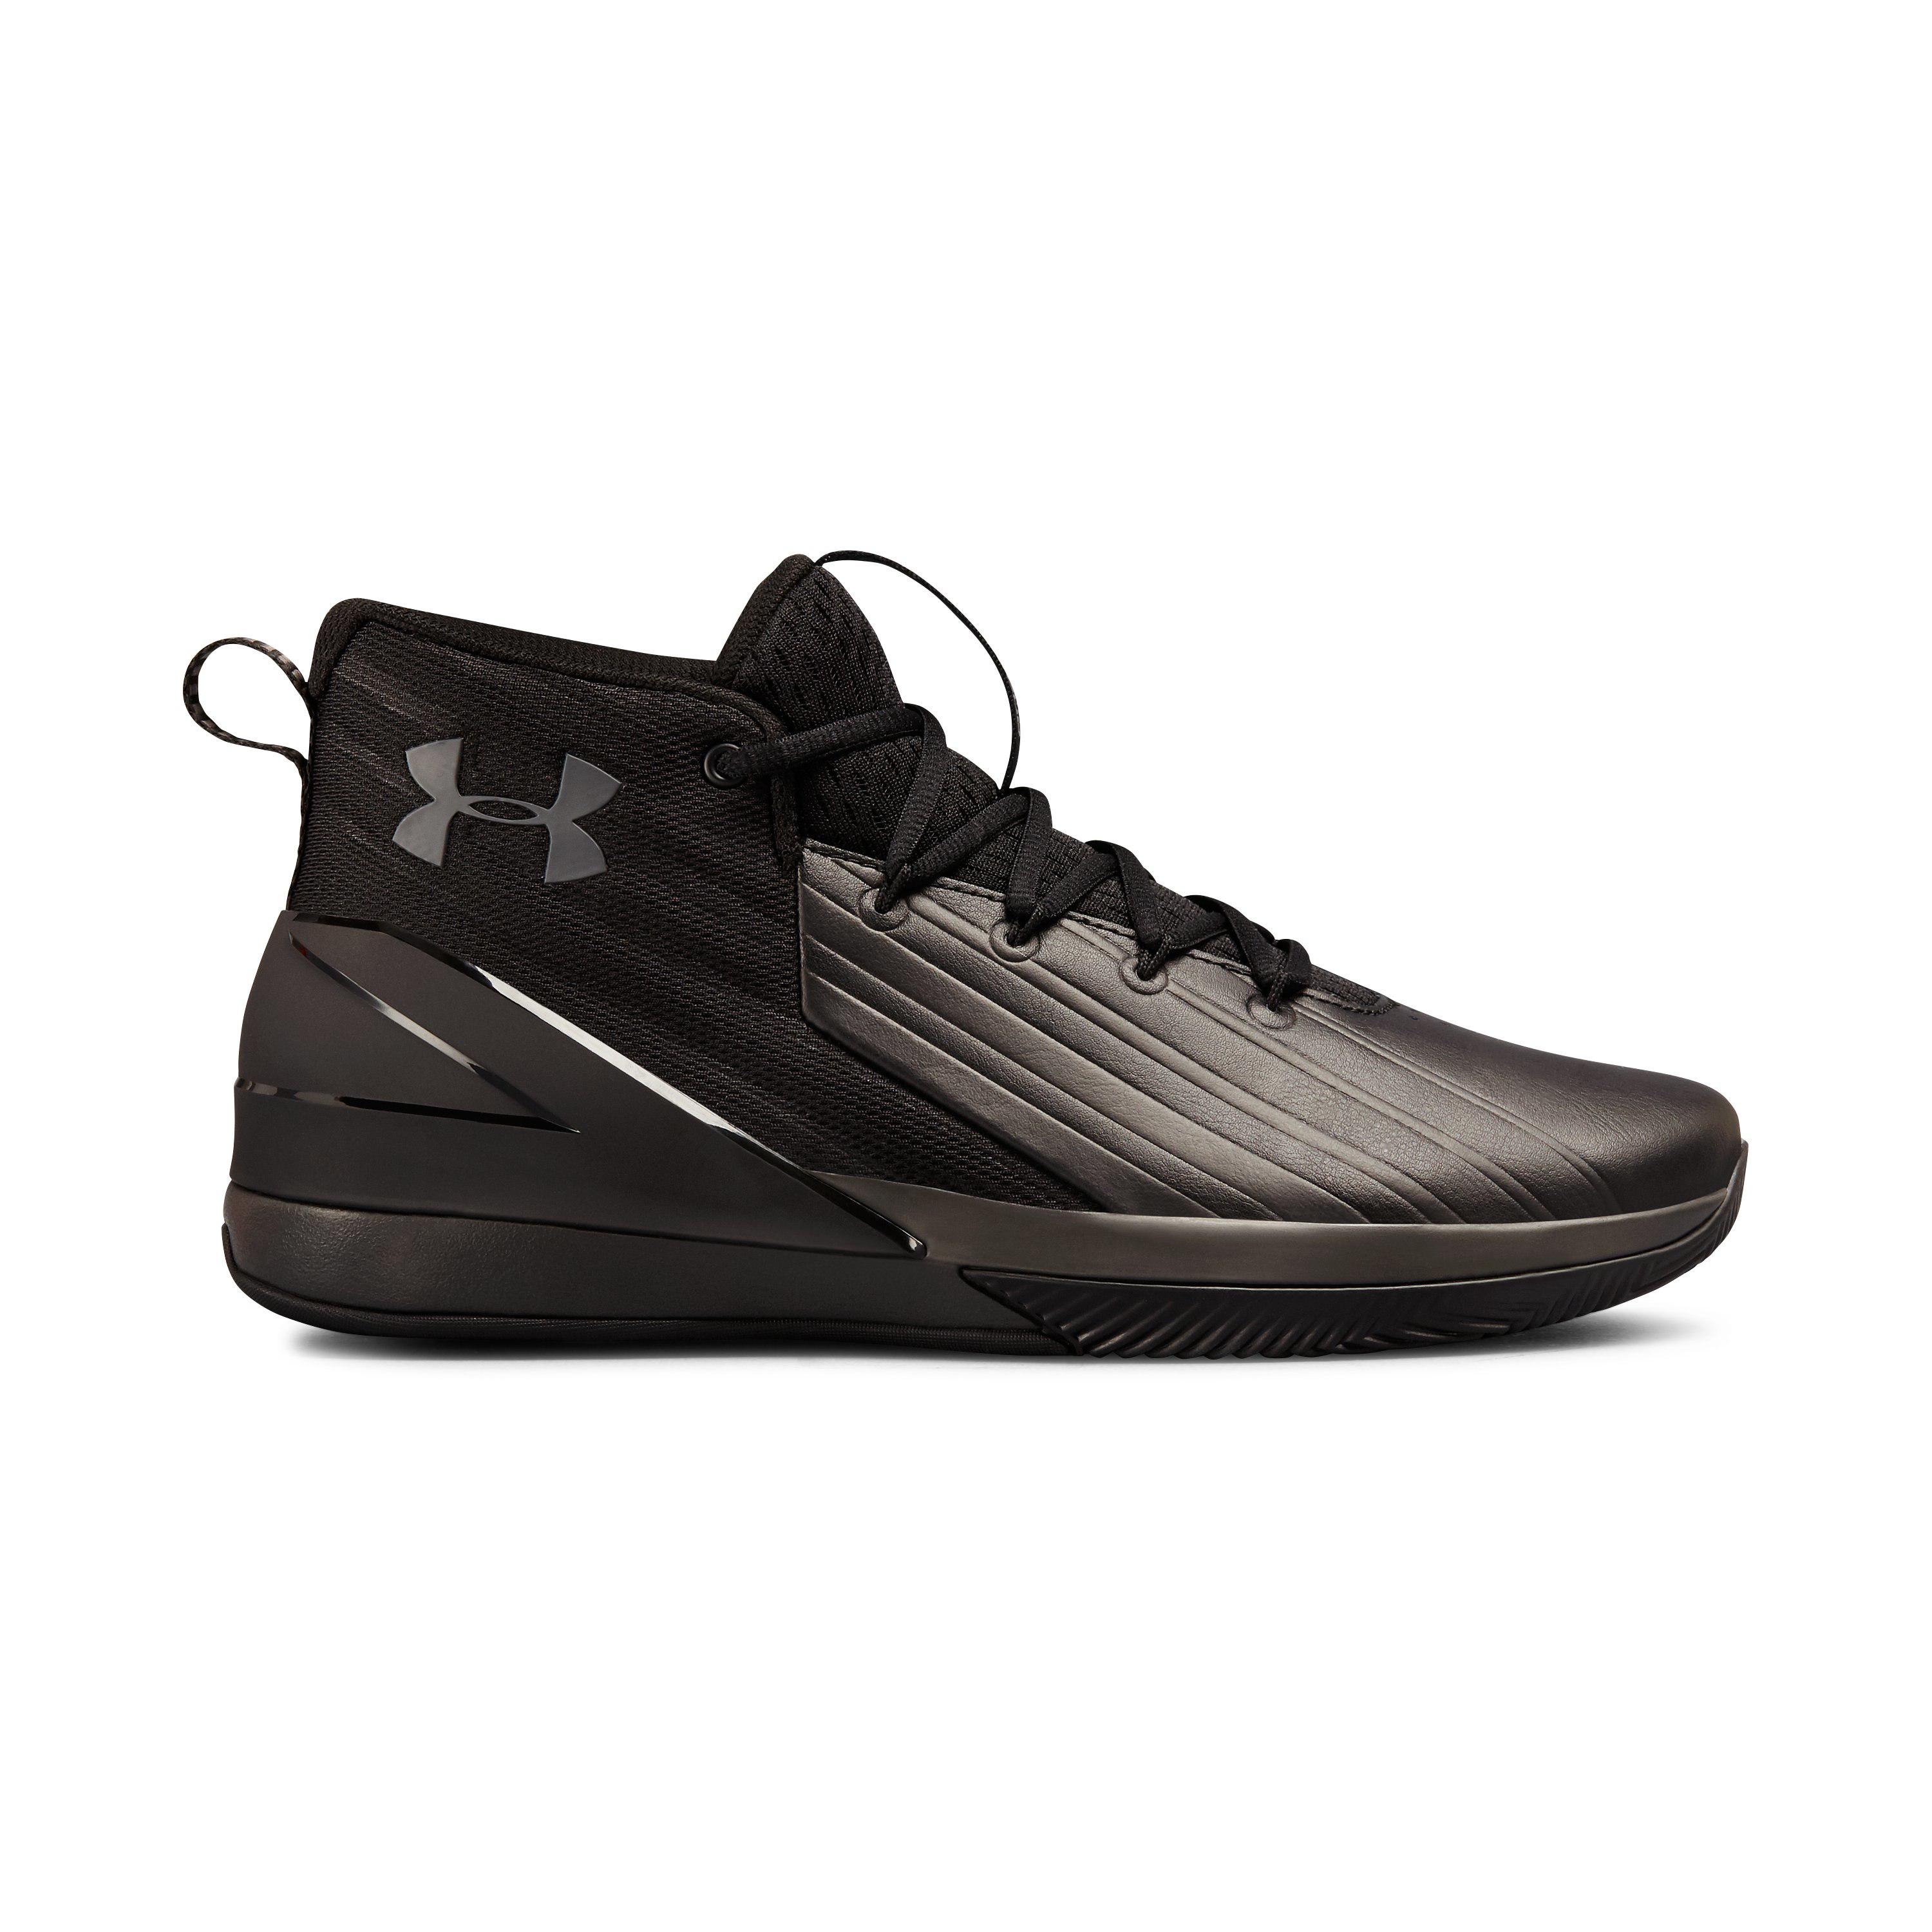 Under Armour Leather Men's Ua Lockdown 3 Basketball Shoes in Black  /Charcoal (Black) for Men - Lyst